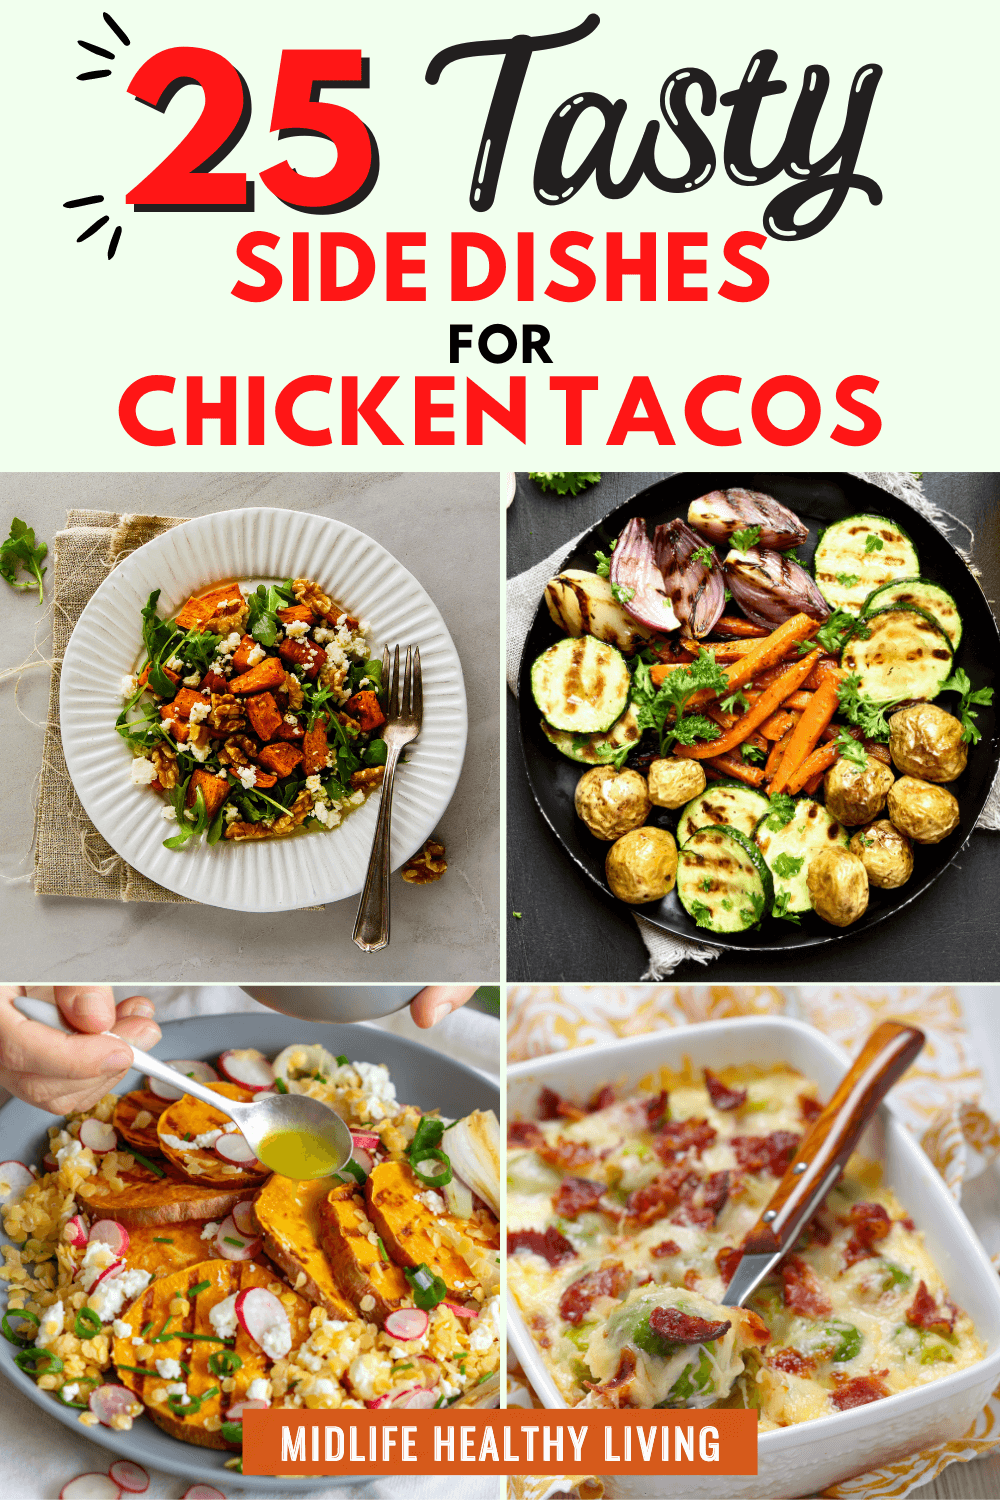 Tasty side dishes recipes for chicken tacos